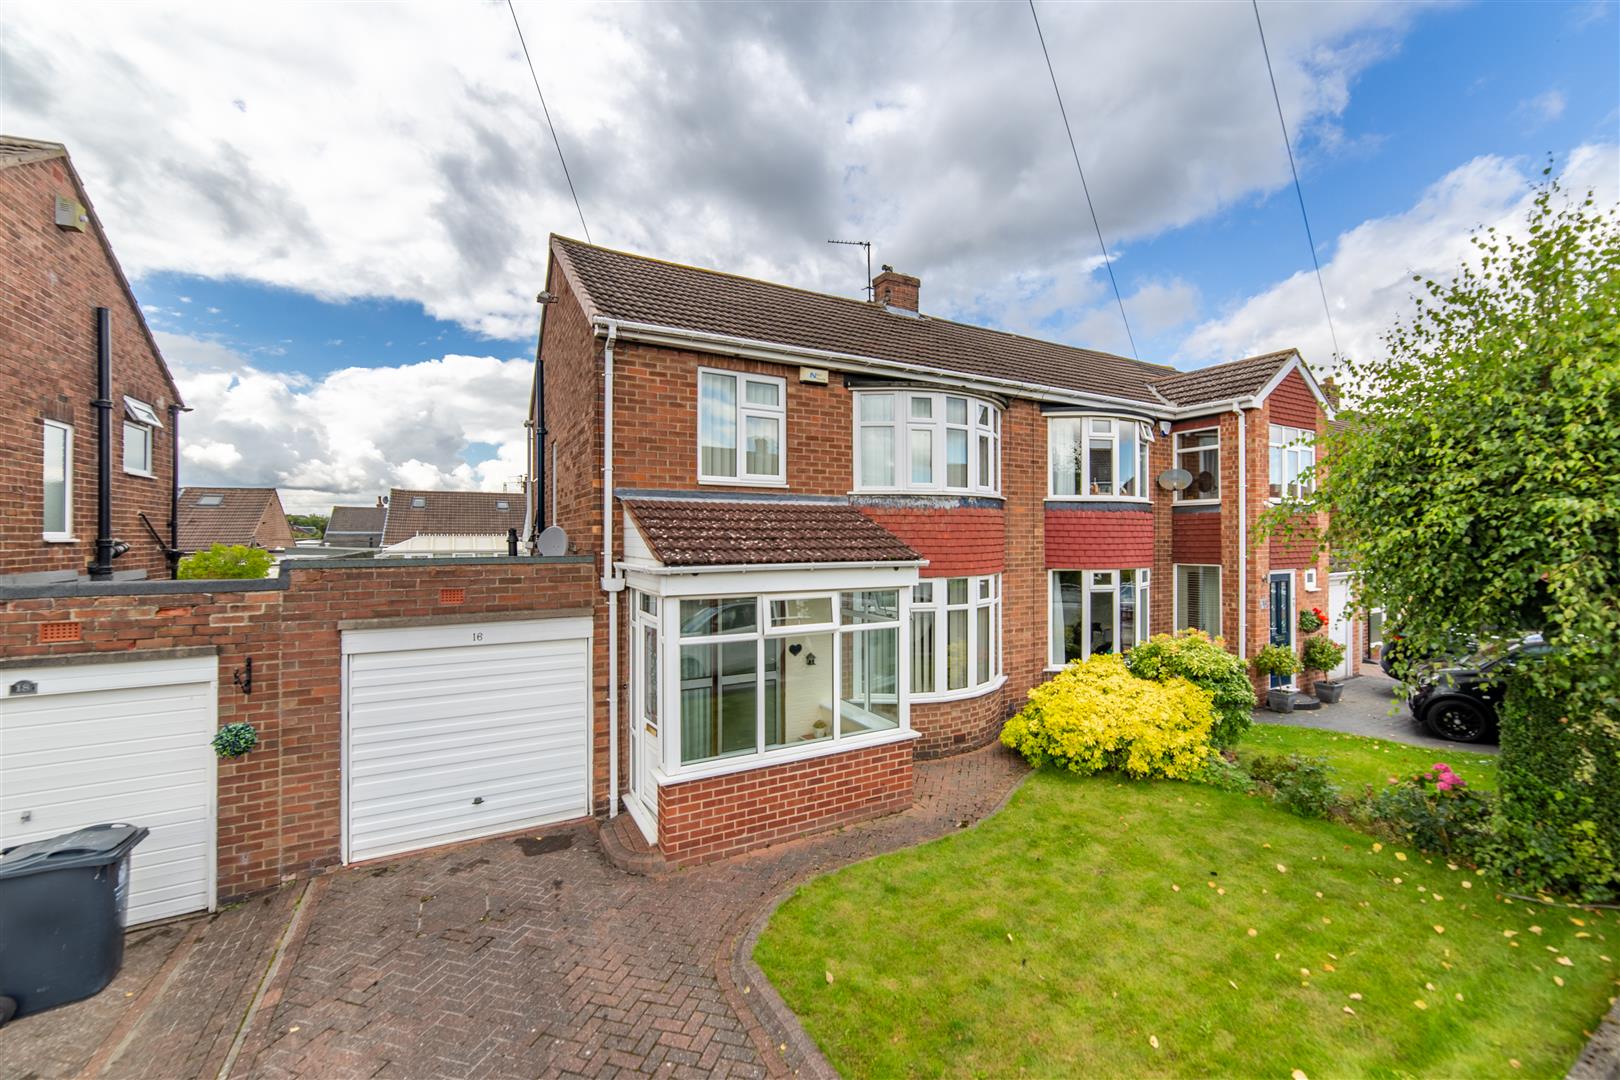 3 bed semi-detached house for sale in Barrasford Drive, Wideopen  - Property Image 1